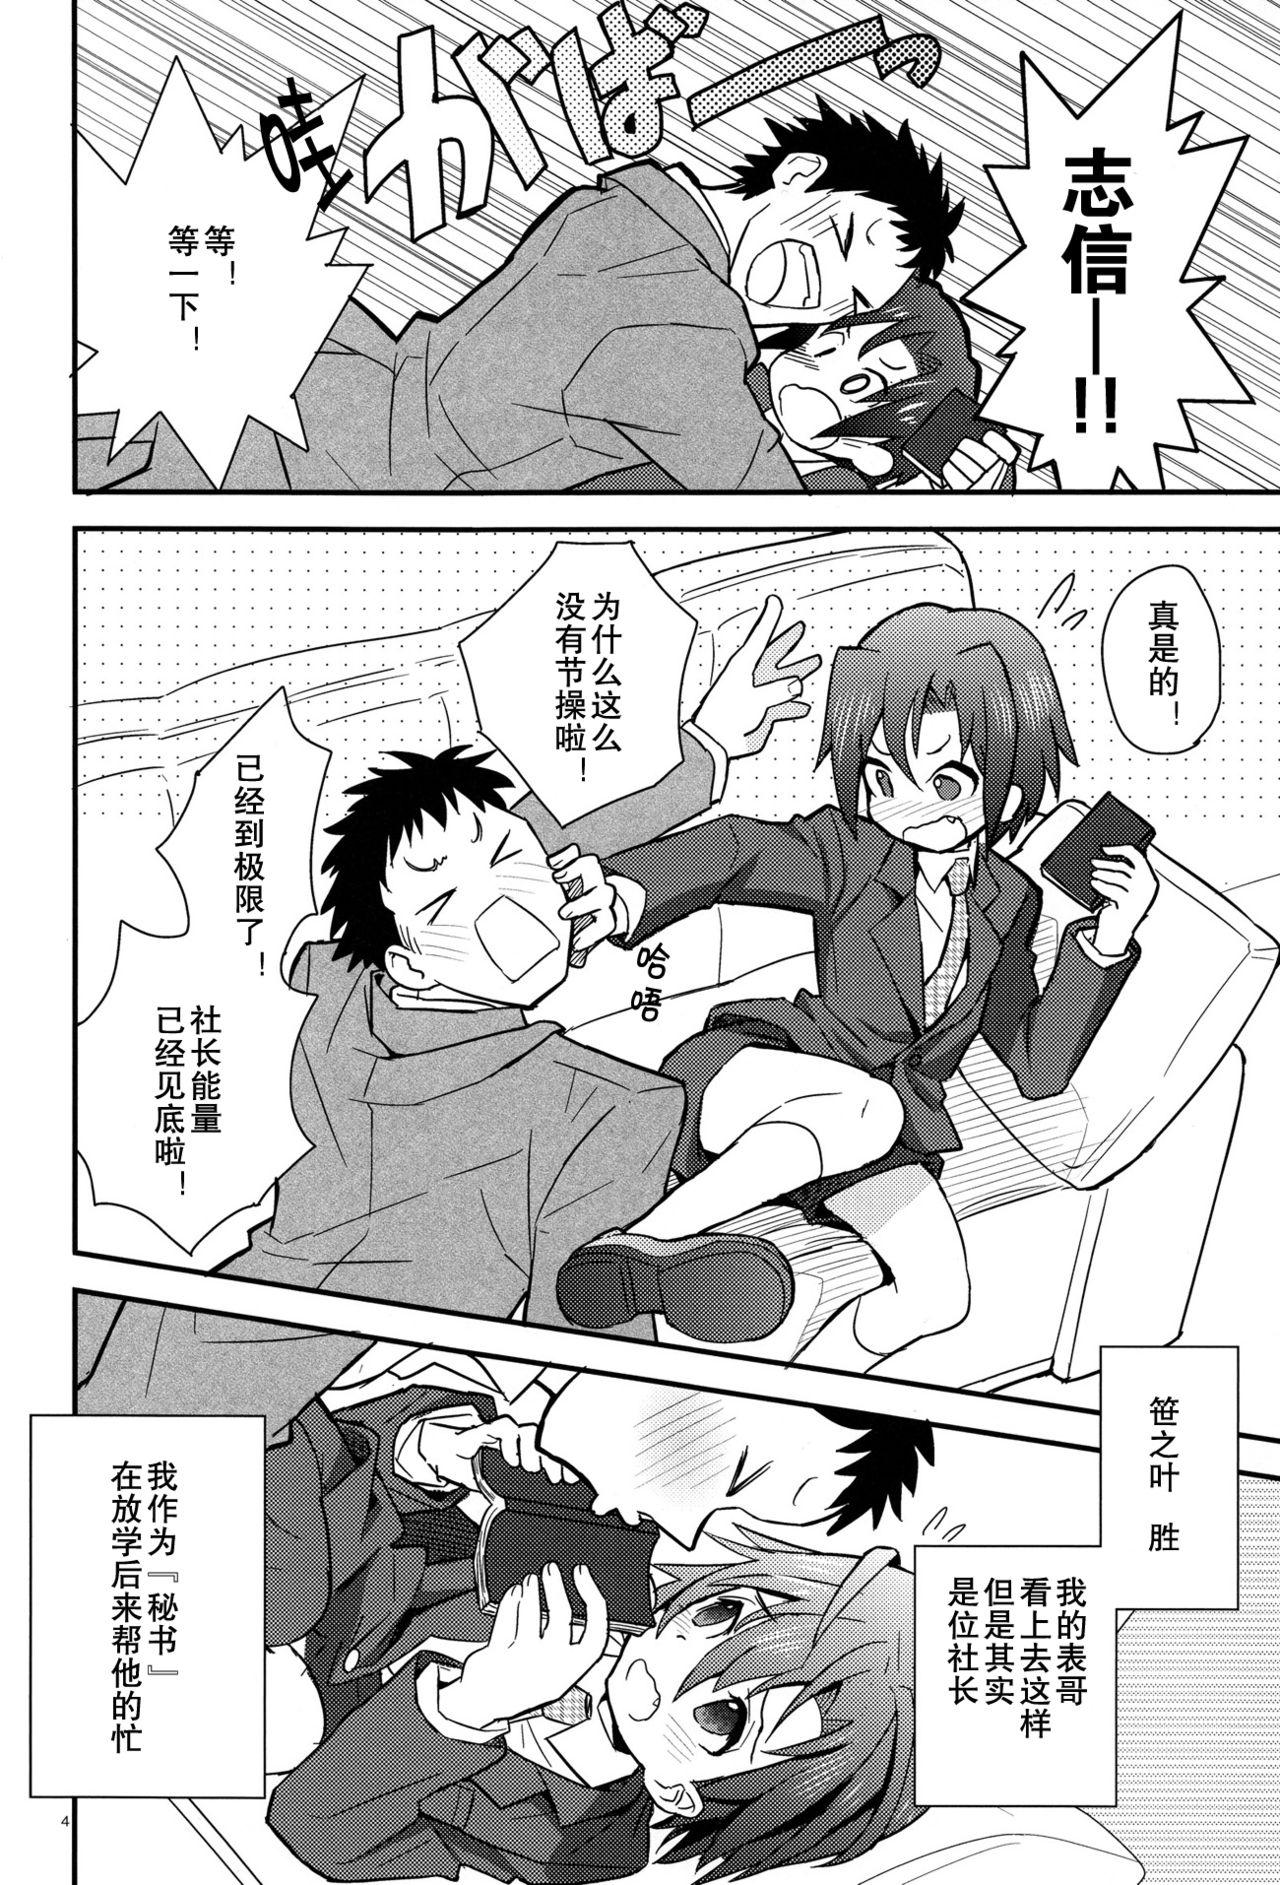 Old Houkago Hisho Note | 放课后秘书笔记 Girl - Page 5